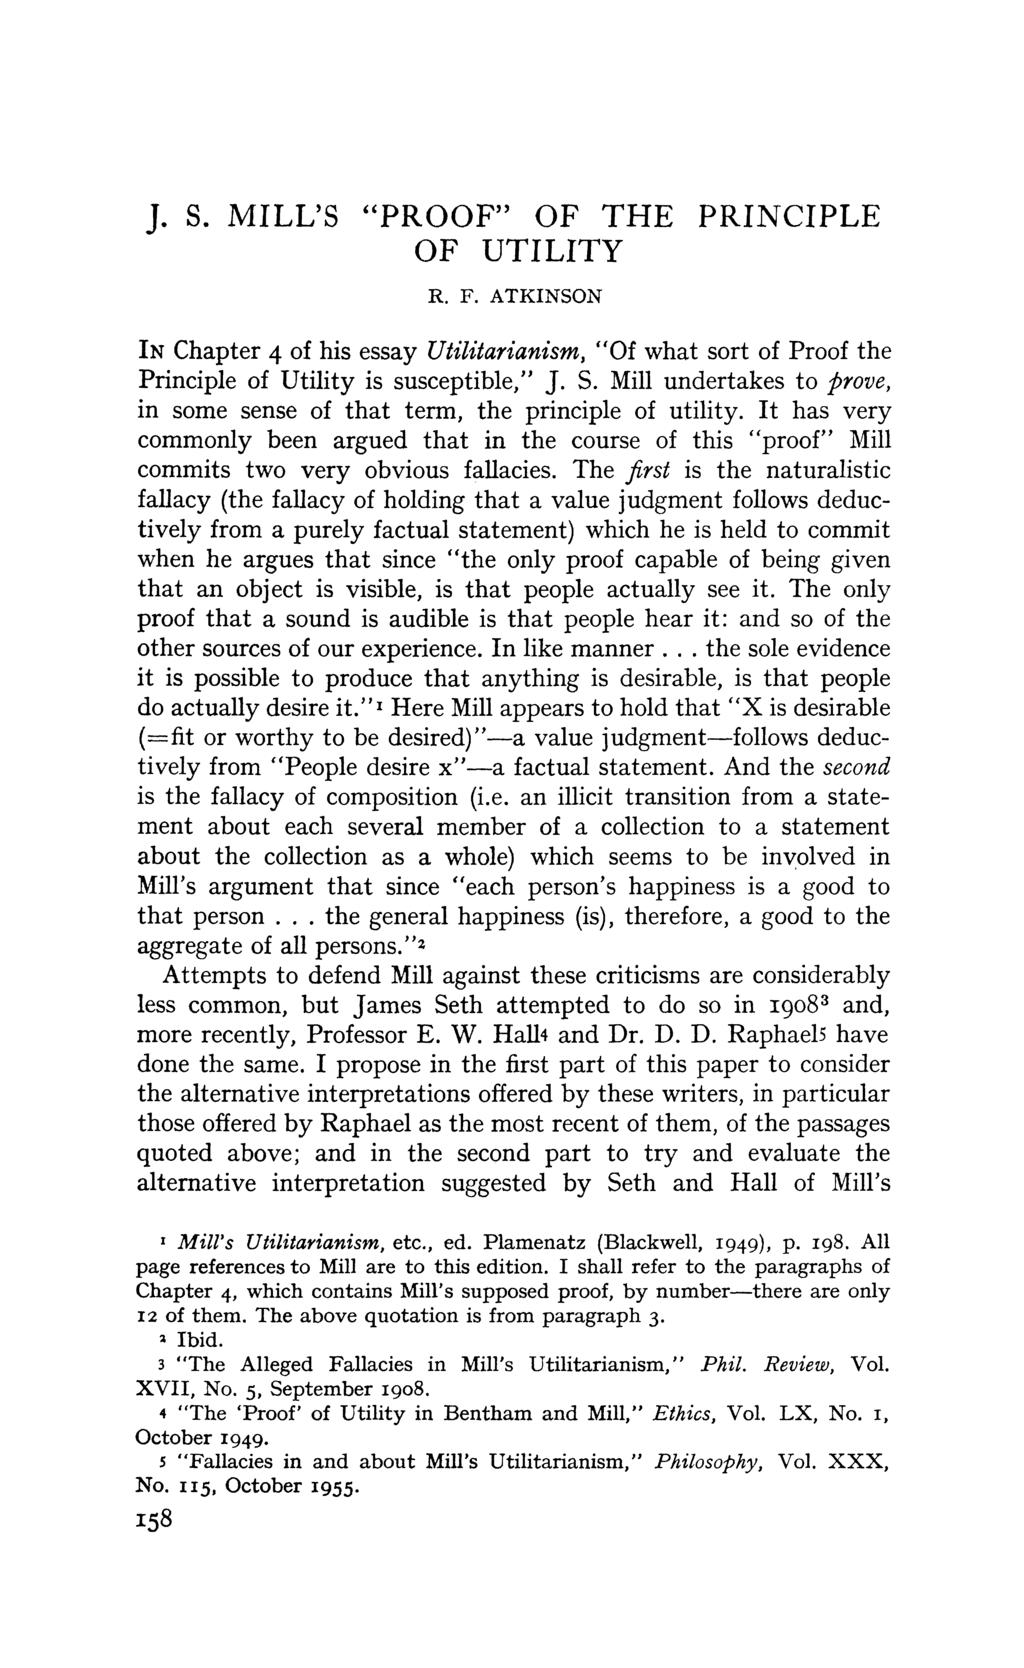 J. S. MILL'S "PROOF" OF THE PRINCIPLE OF UTILITY R. F. ATKINSON IN Chapter 4 of his essay Utilitarianism, "Of what sort of Proof the Principle of Utility is susceptible," J. S. Mill undertakes to prove, in some sense of that term, the principle of utility.